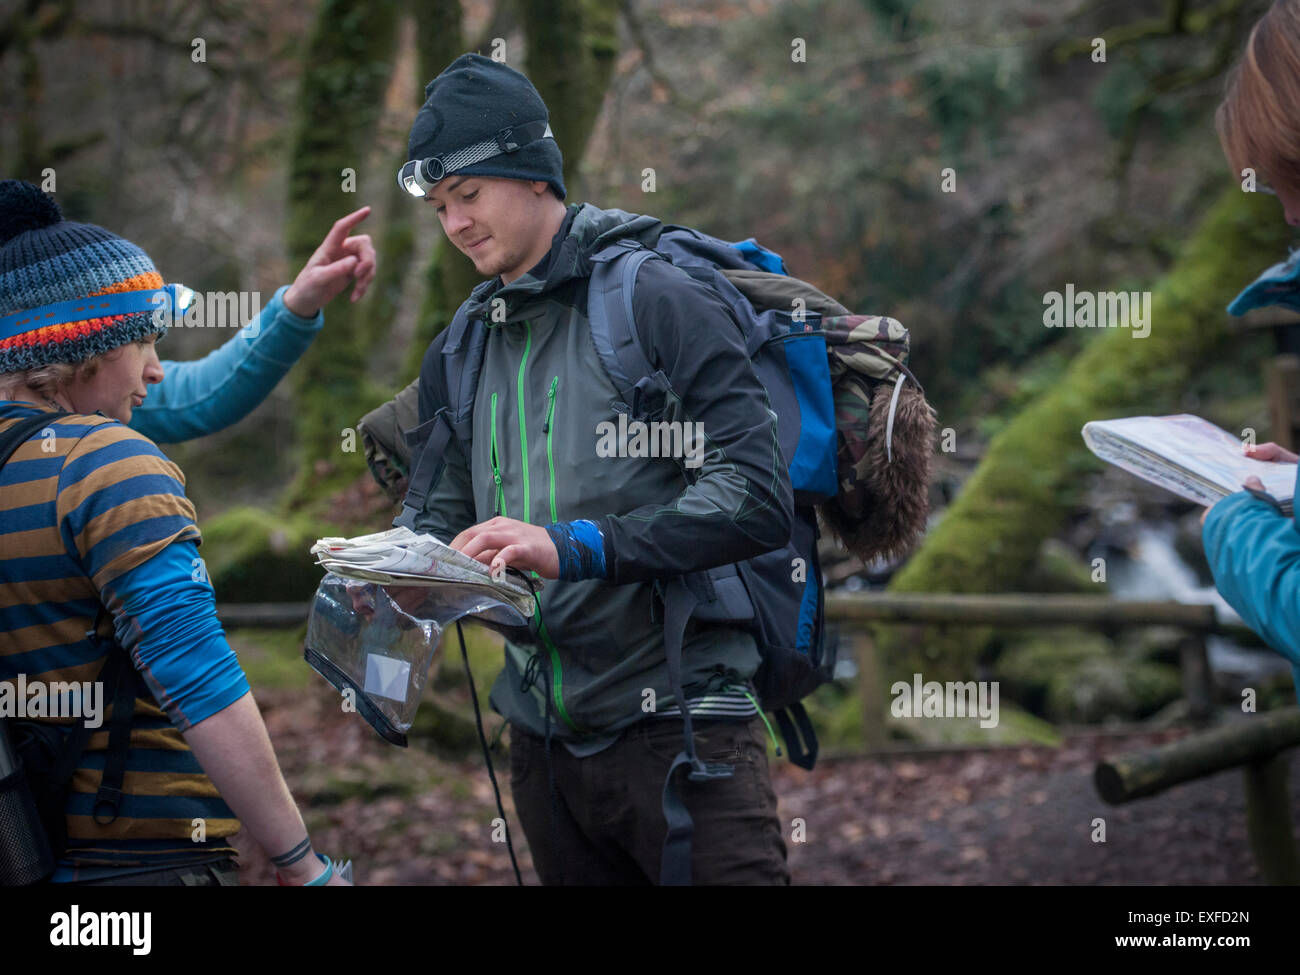 Young man with map preparing to go orienteering Stock Photo